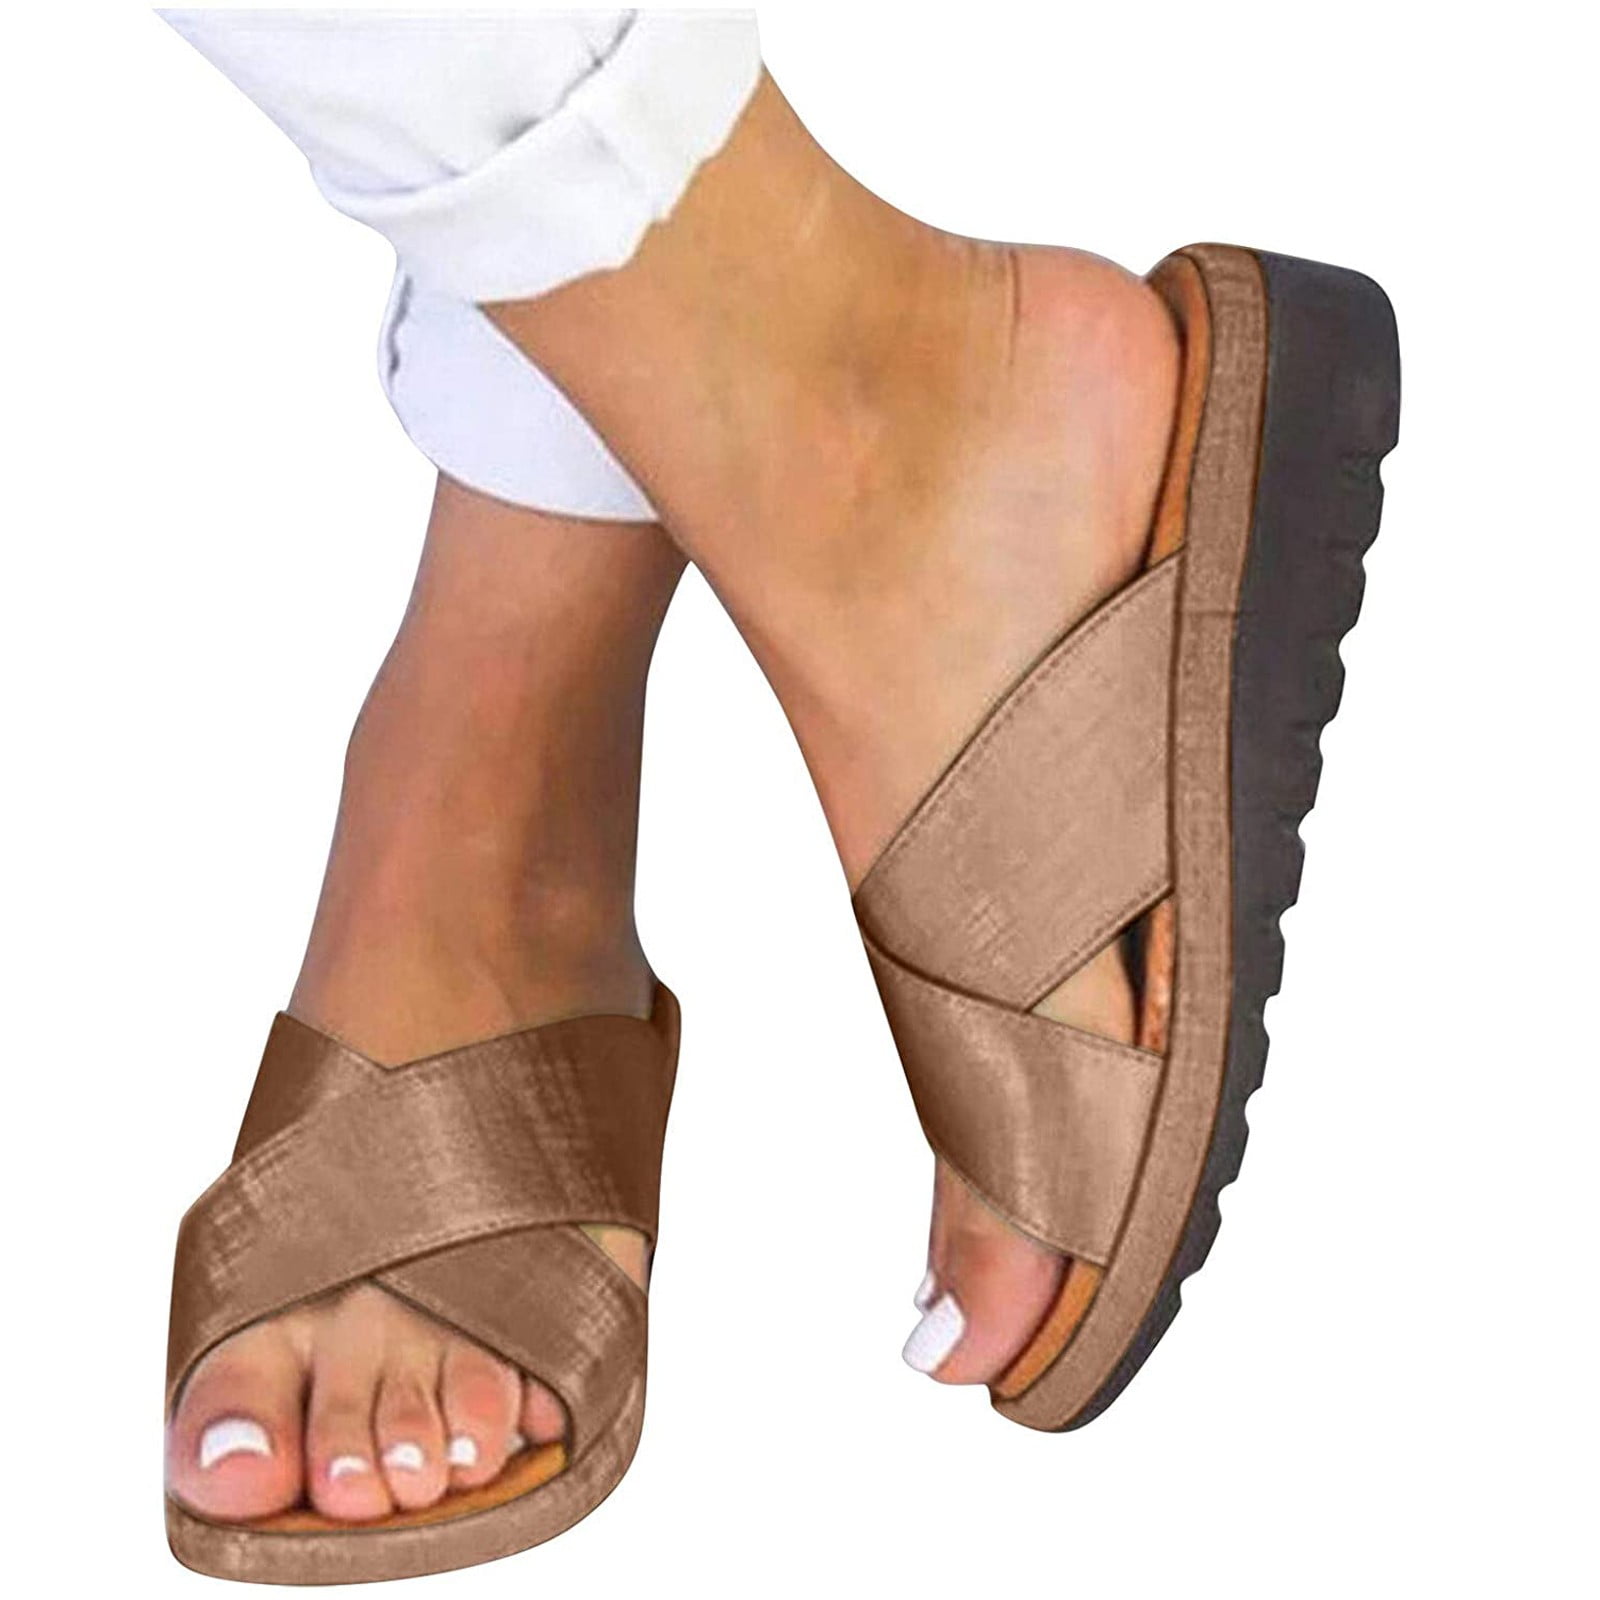 Details about    Chic Comfort Slide Slippers Leather Square Toe Sandals Beach Pool Women Shoes 